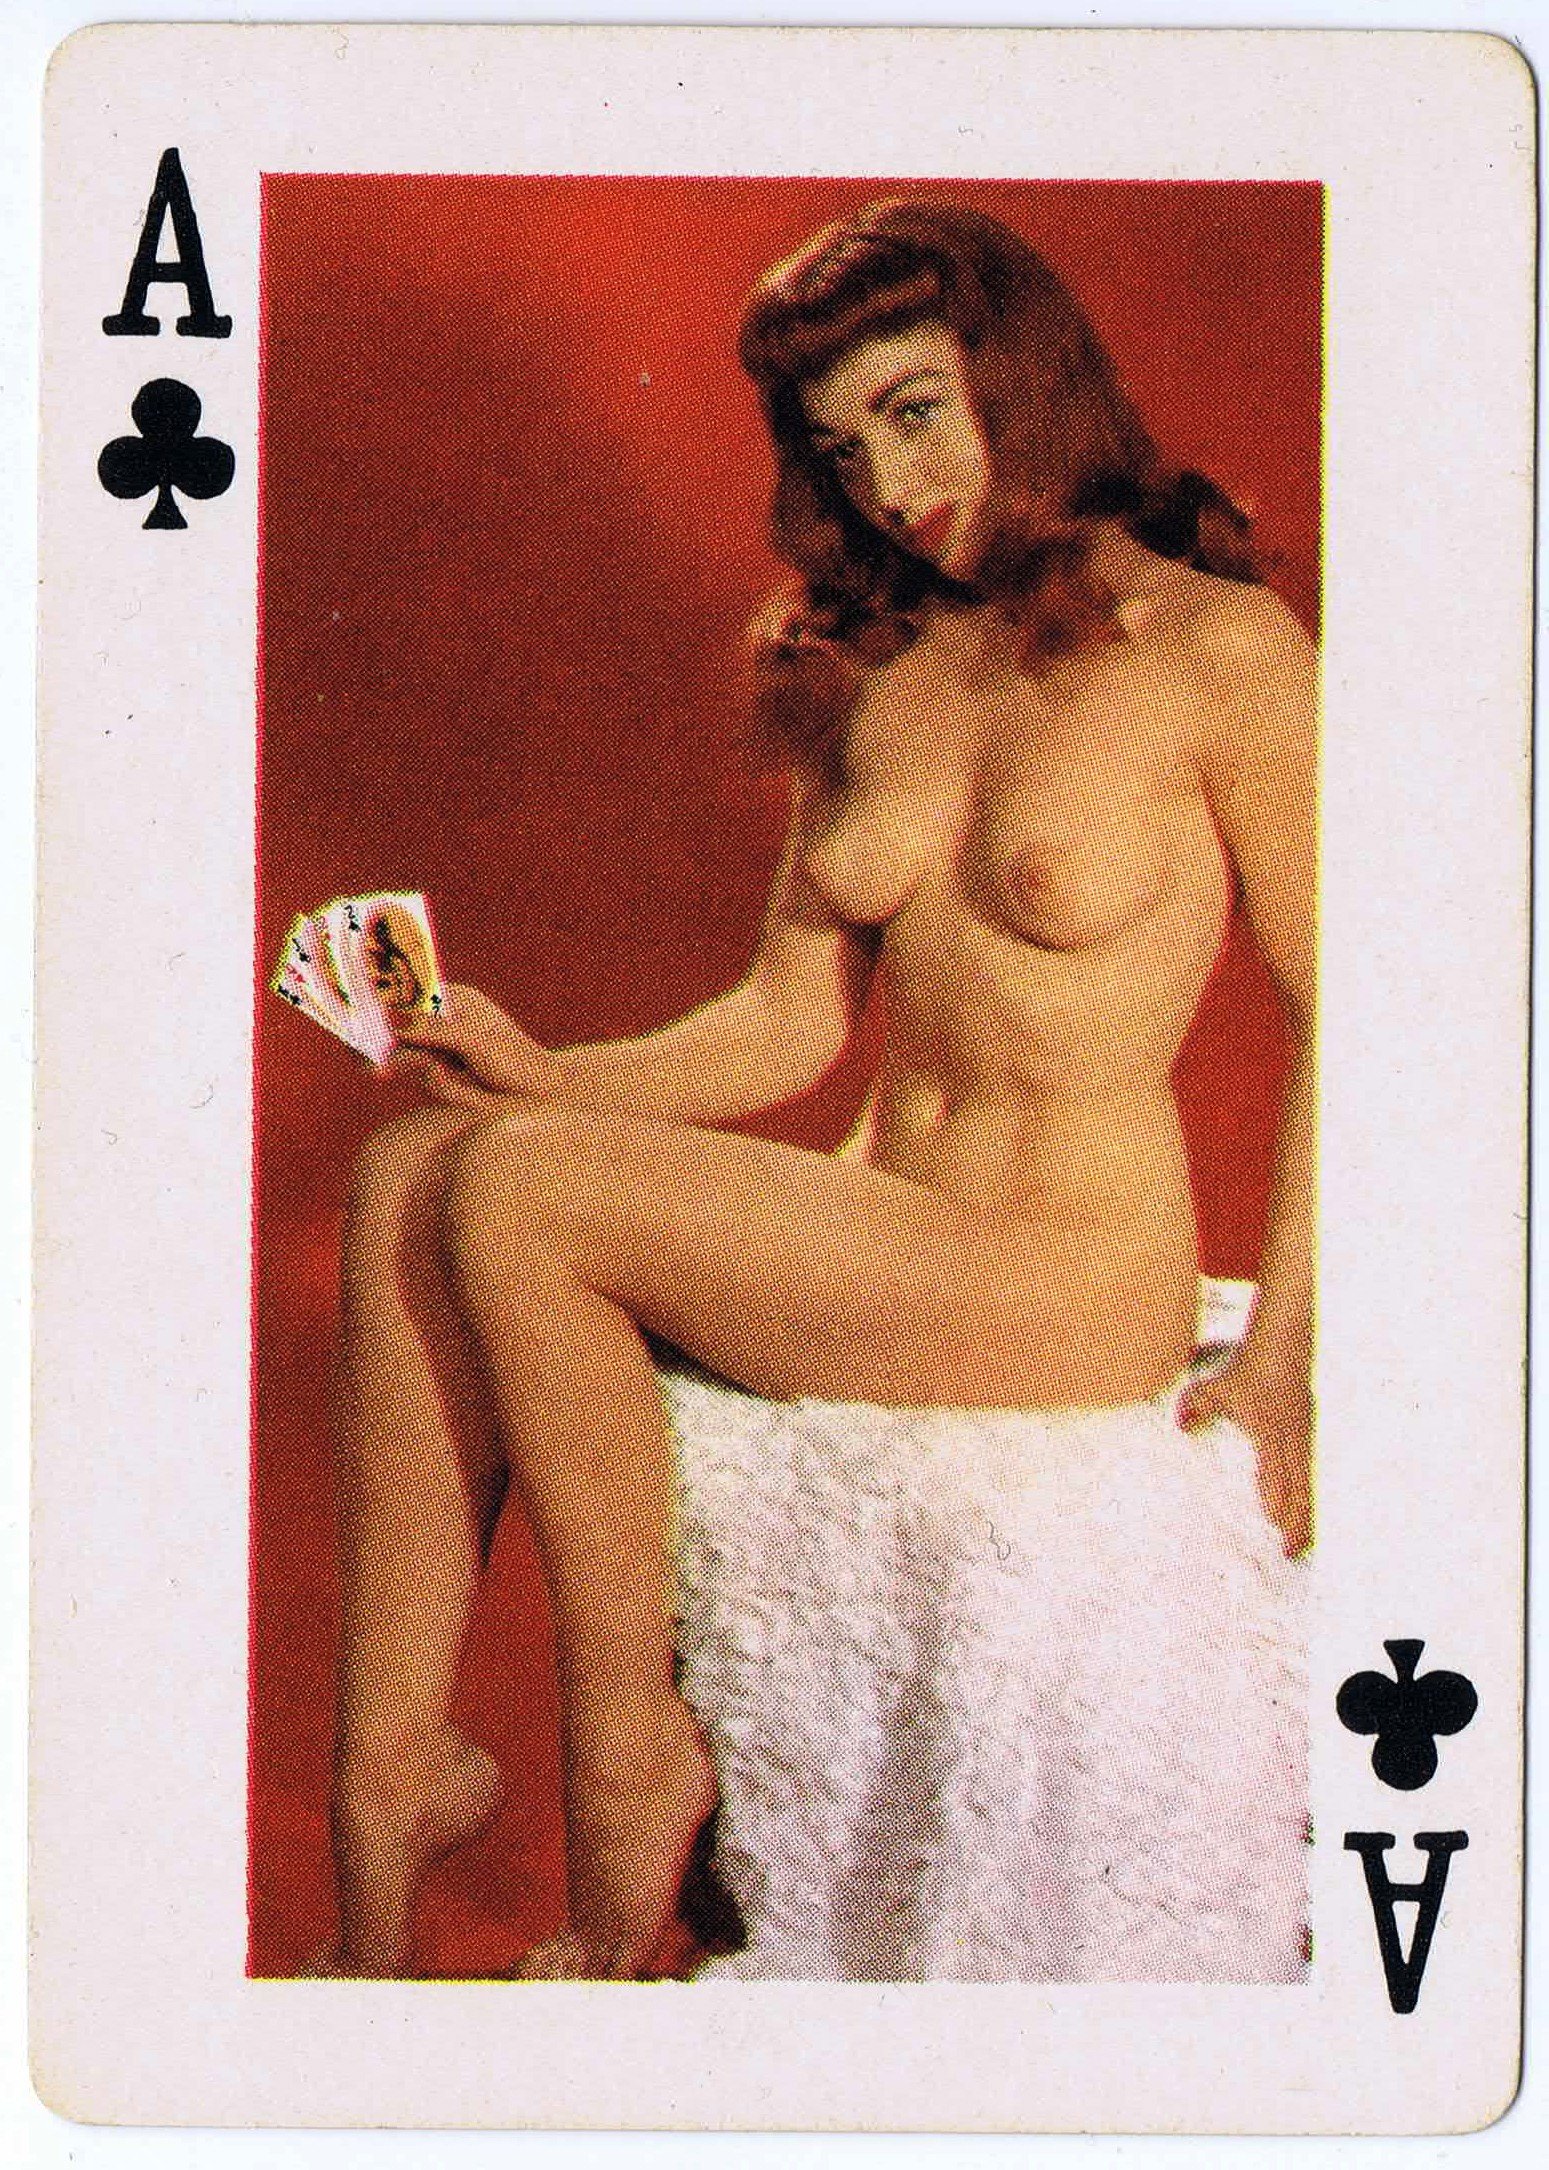 Photo by CRD Larson Art with the username @CRDLarson, who is a verified user,  September 2, 2019 at 2:29 PM. The post is about the topic Nude Playing Cards and the text says 'Ace of Clubs
From deck titled 'Fifty-Two Art Studies' by the Novelties Manufacturing and Sales Corp, St. Louis, MO. Mid 1950s'